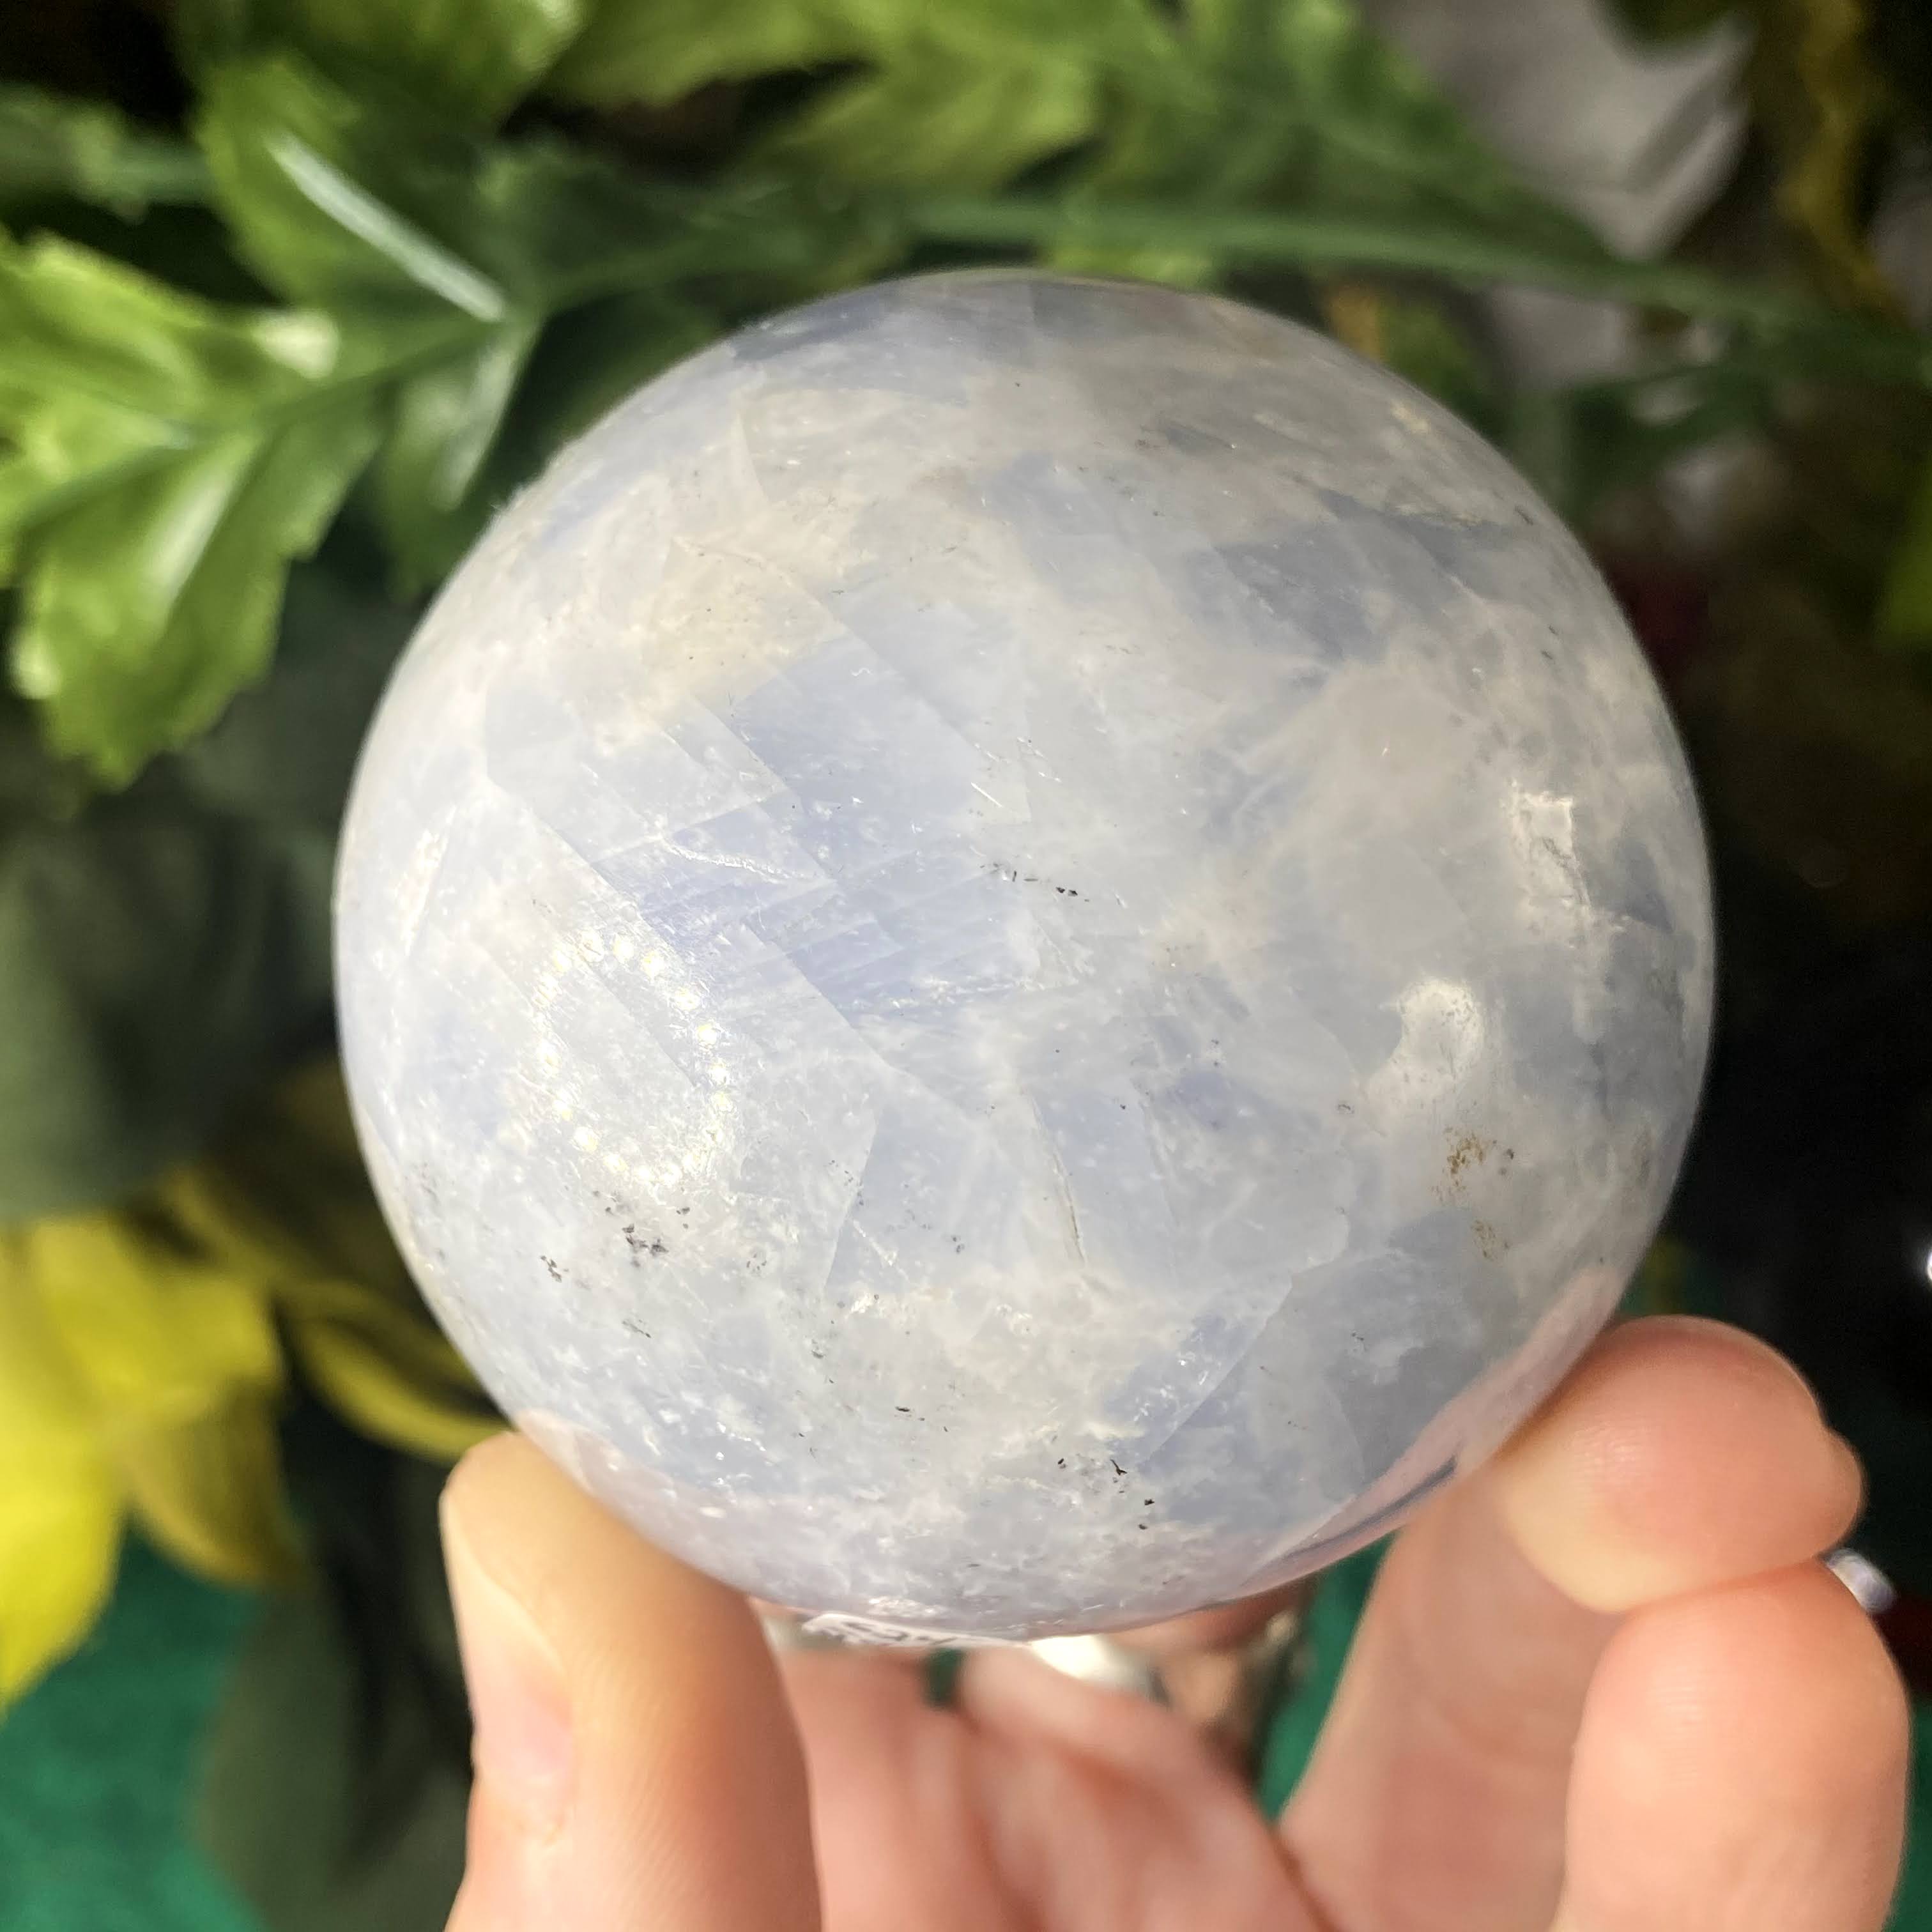 Calcite - Soothing Blue Calcite 59mm Sphere! A917